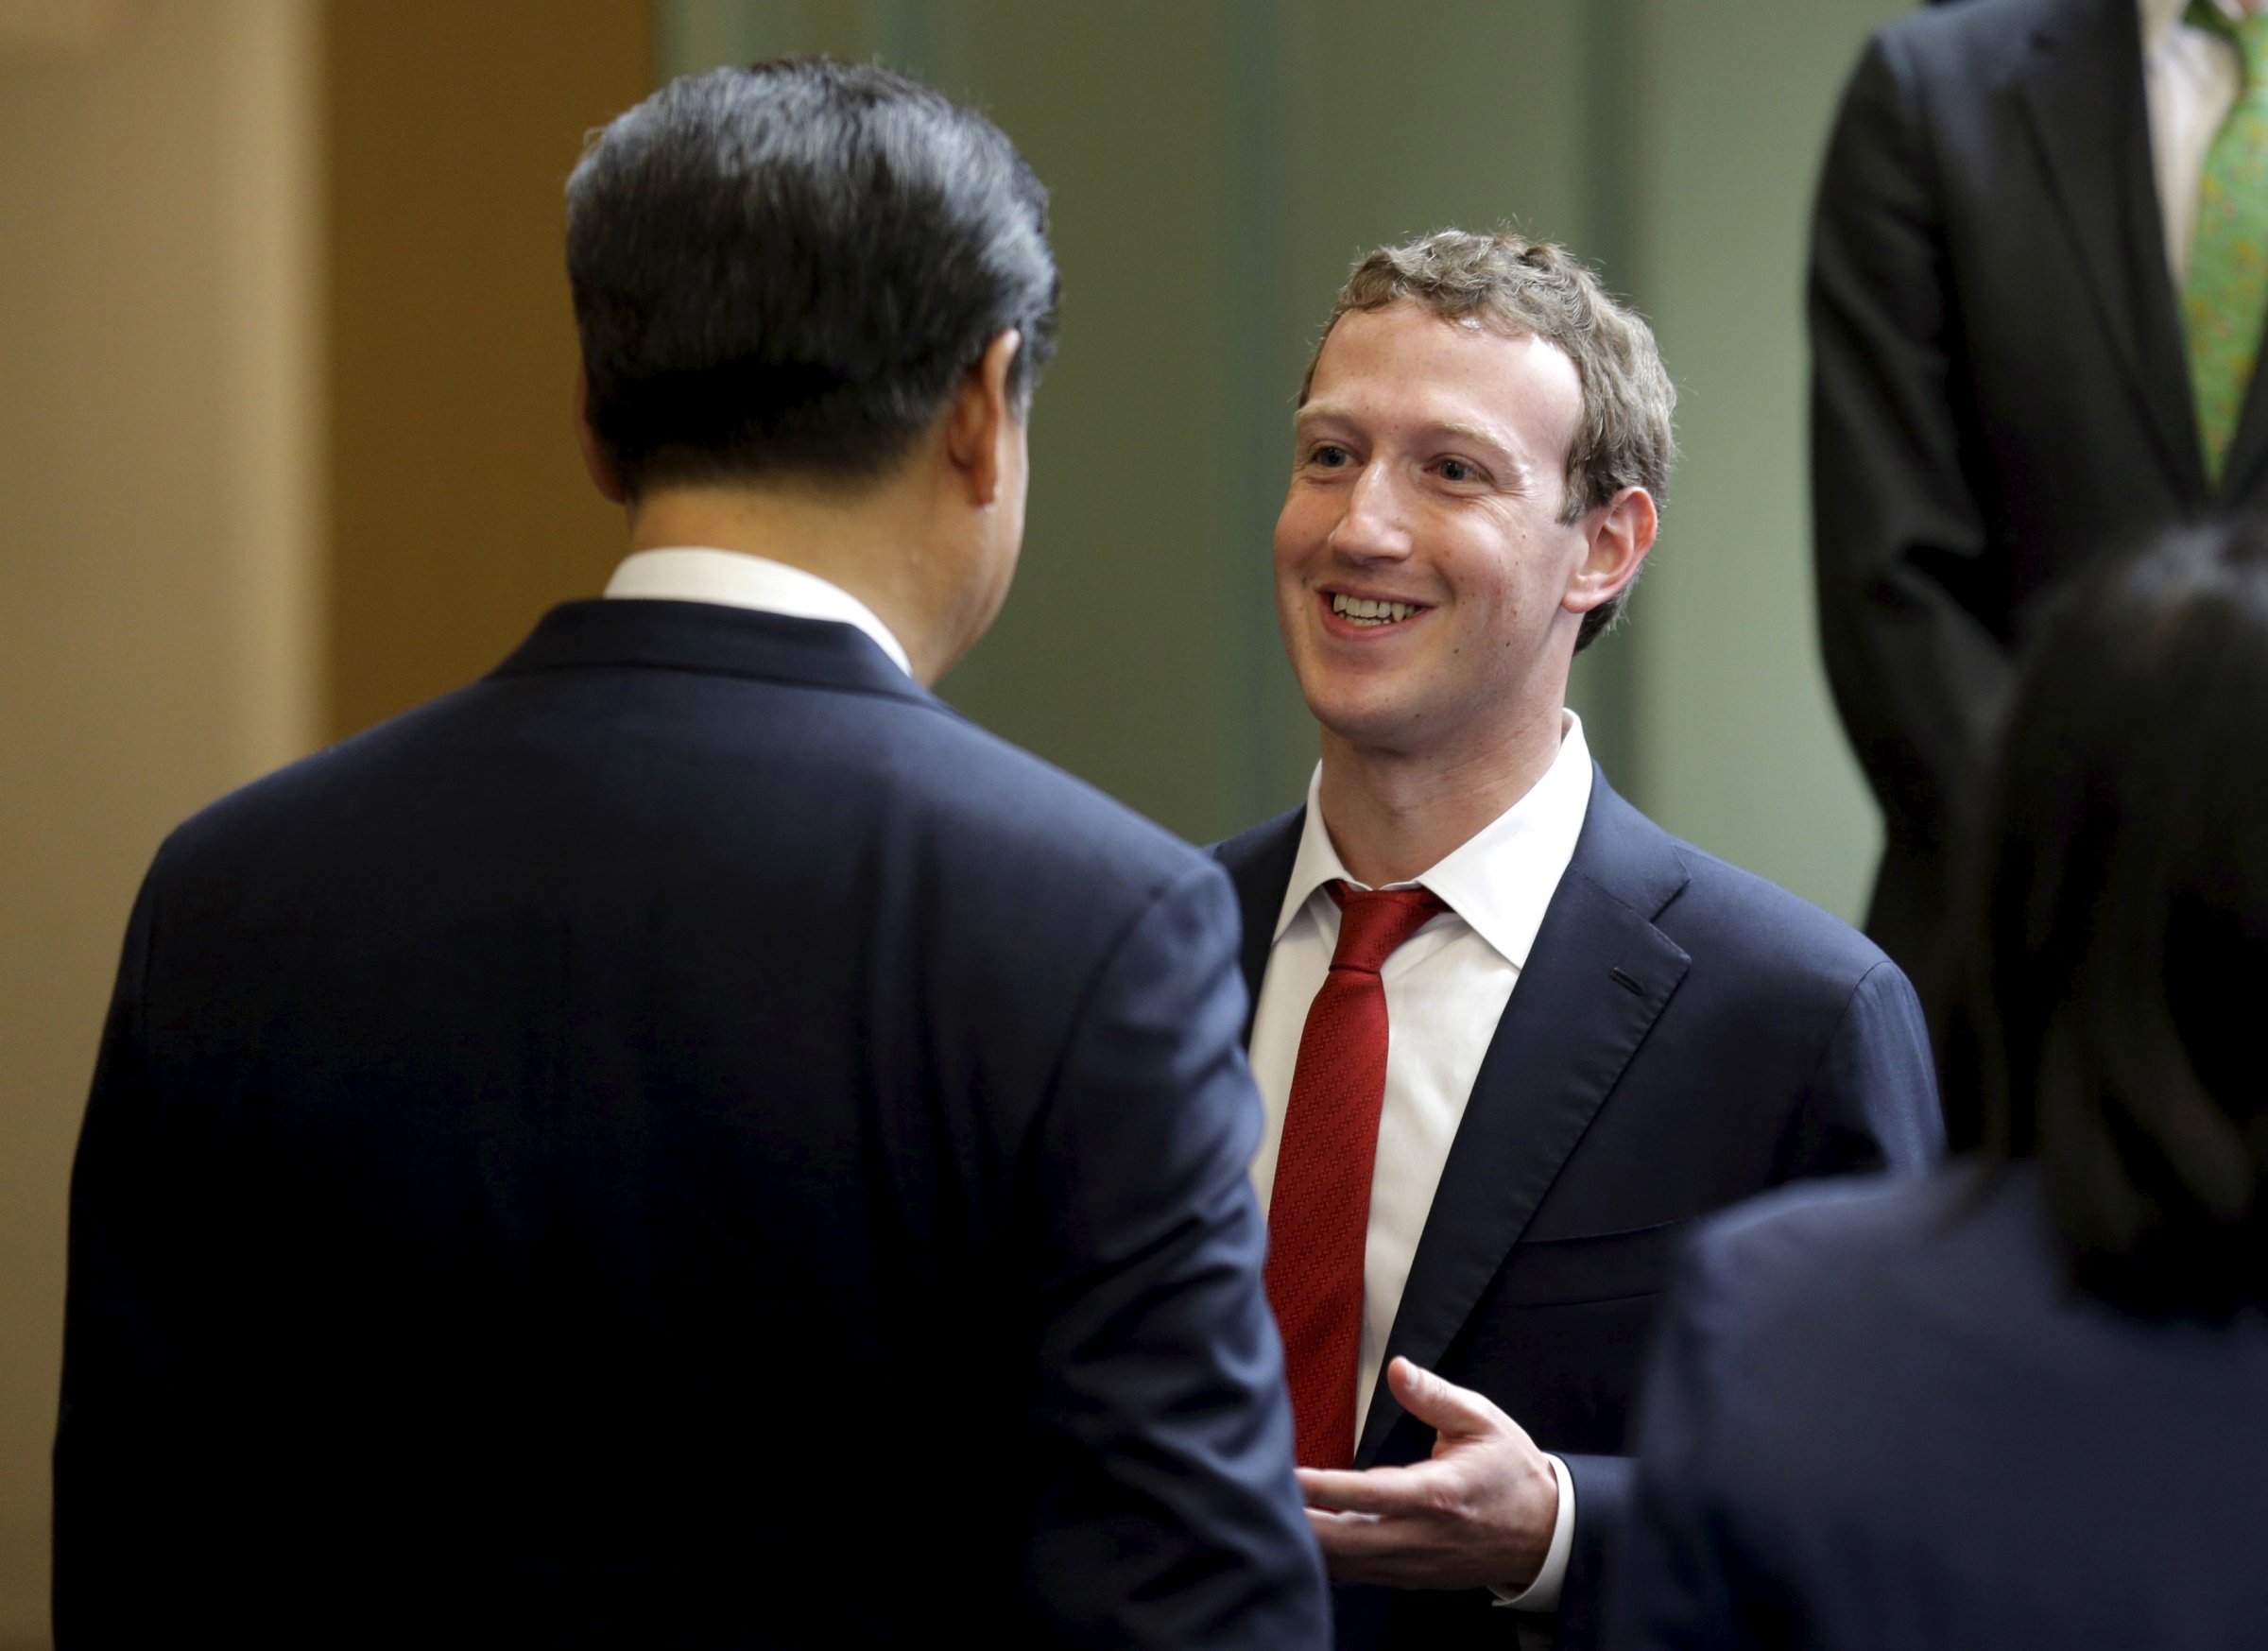 Chinese President Xi Jinping (L) talks with Facebook Chief Executive Mark Zuckerberg during a gathering of CEOs and other executives at Microsoft's main campus in Redmond, Washington